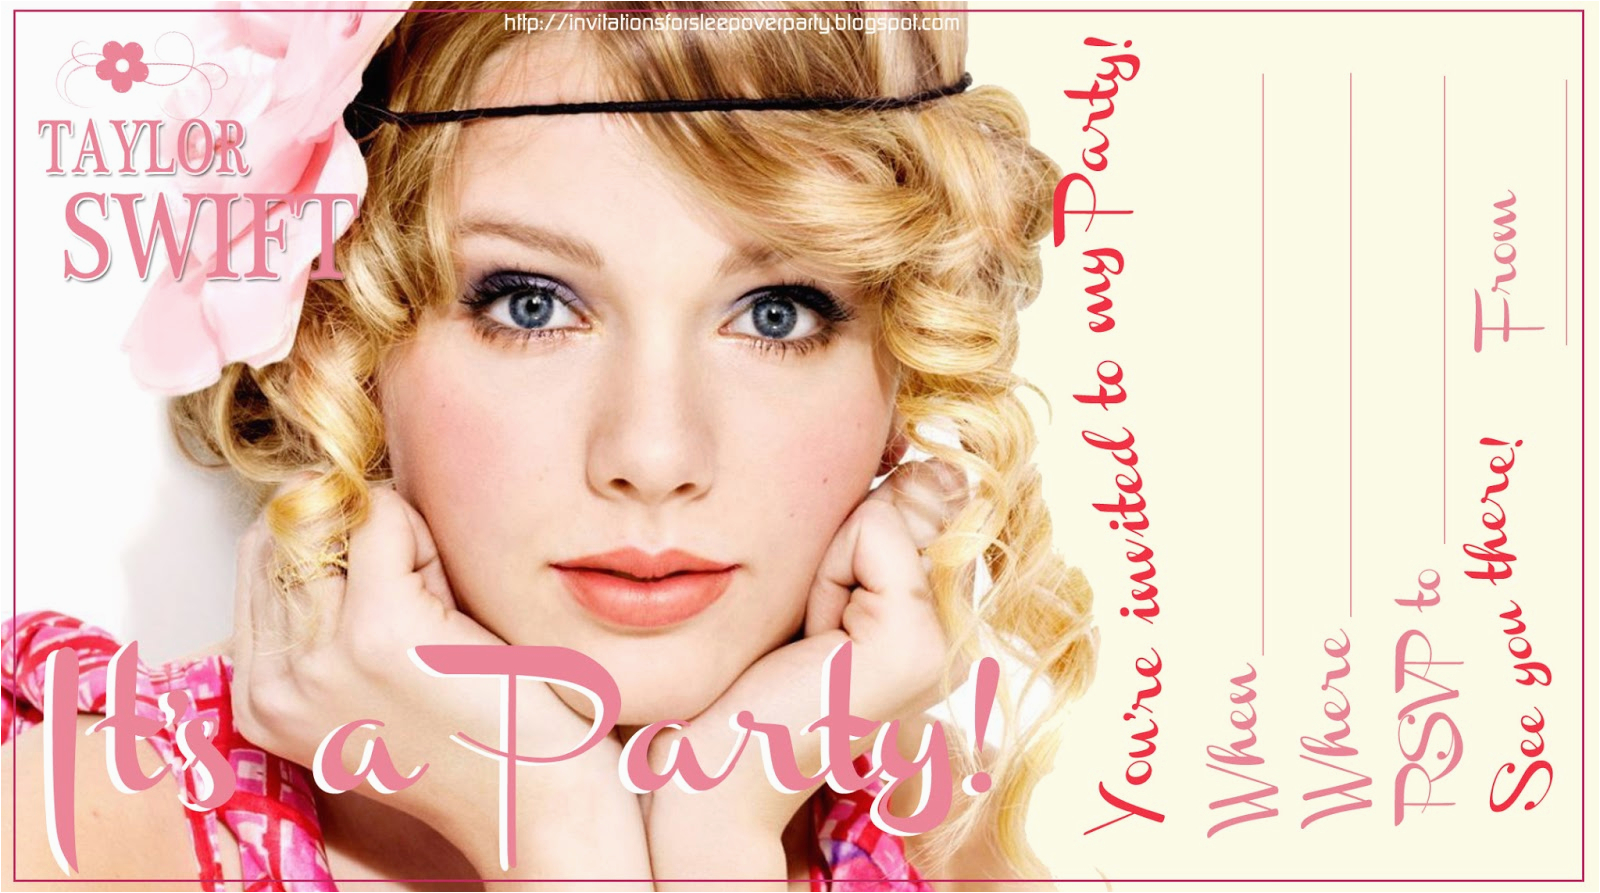 taylor swift party invitation free to